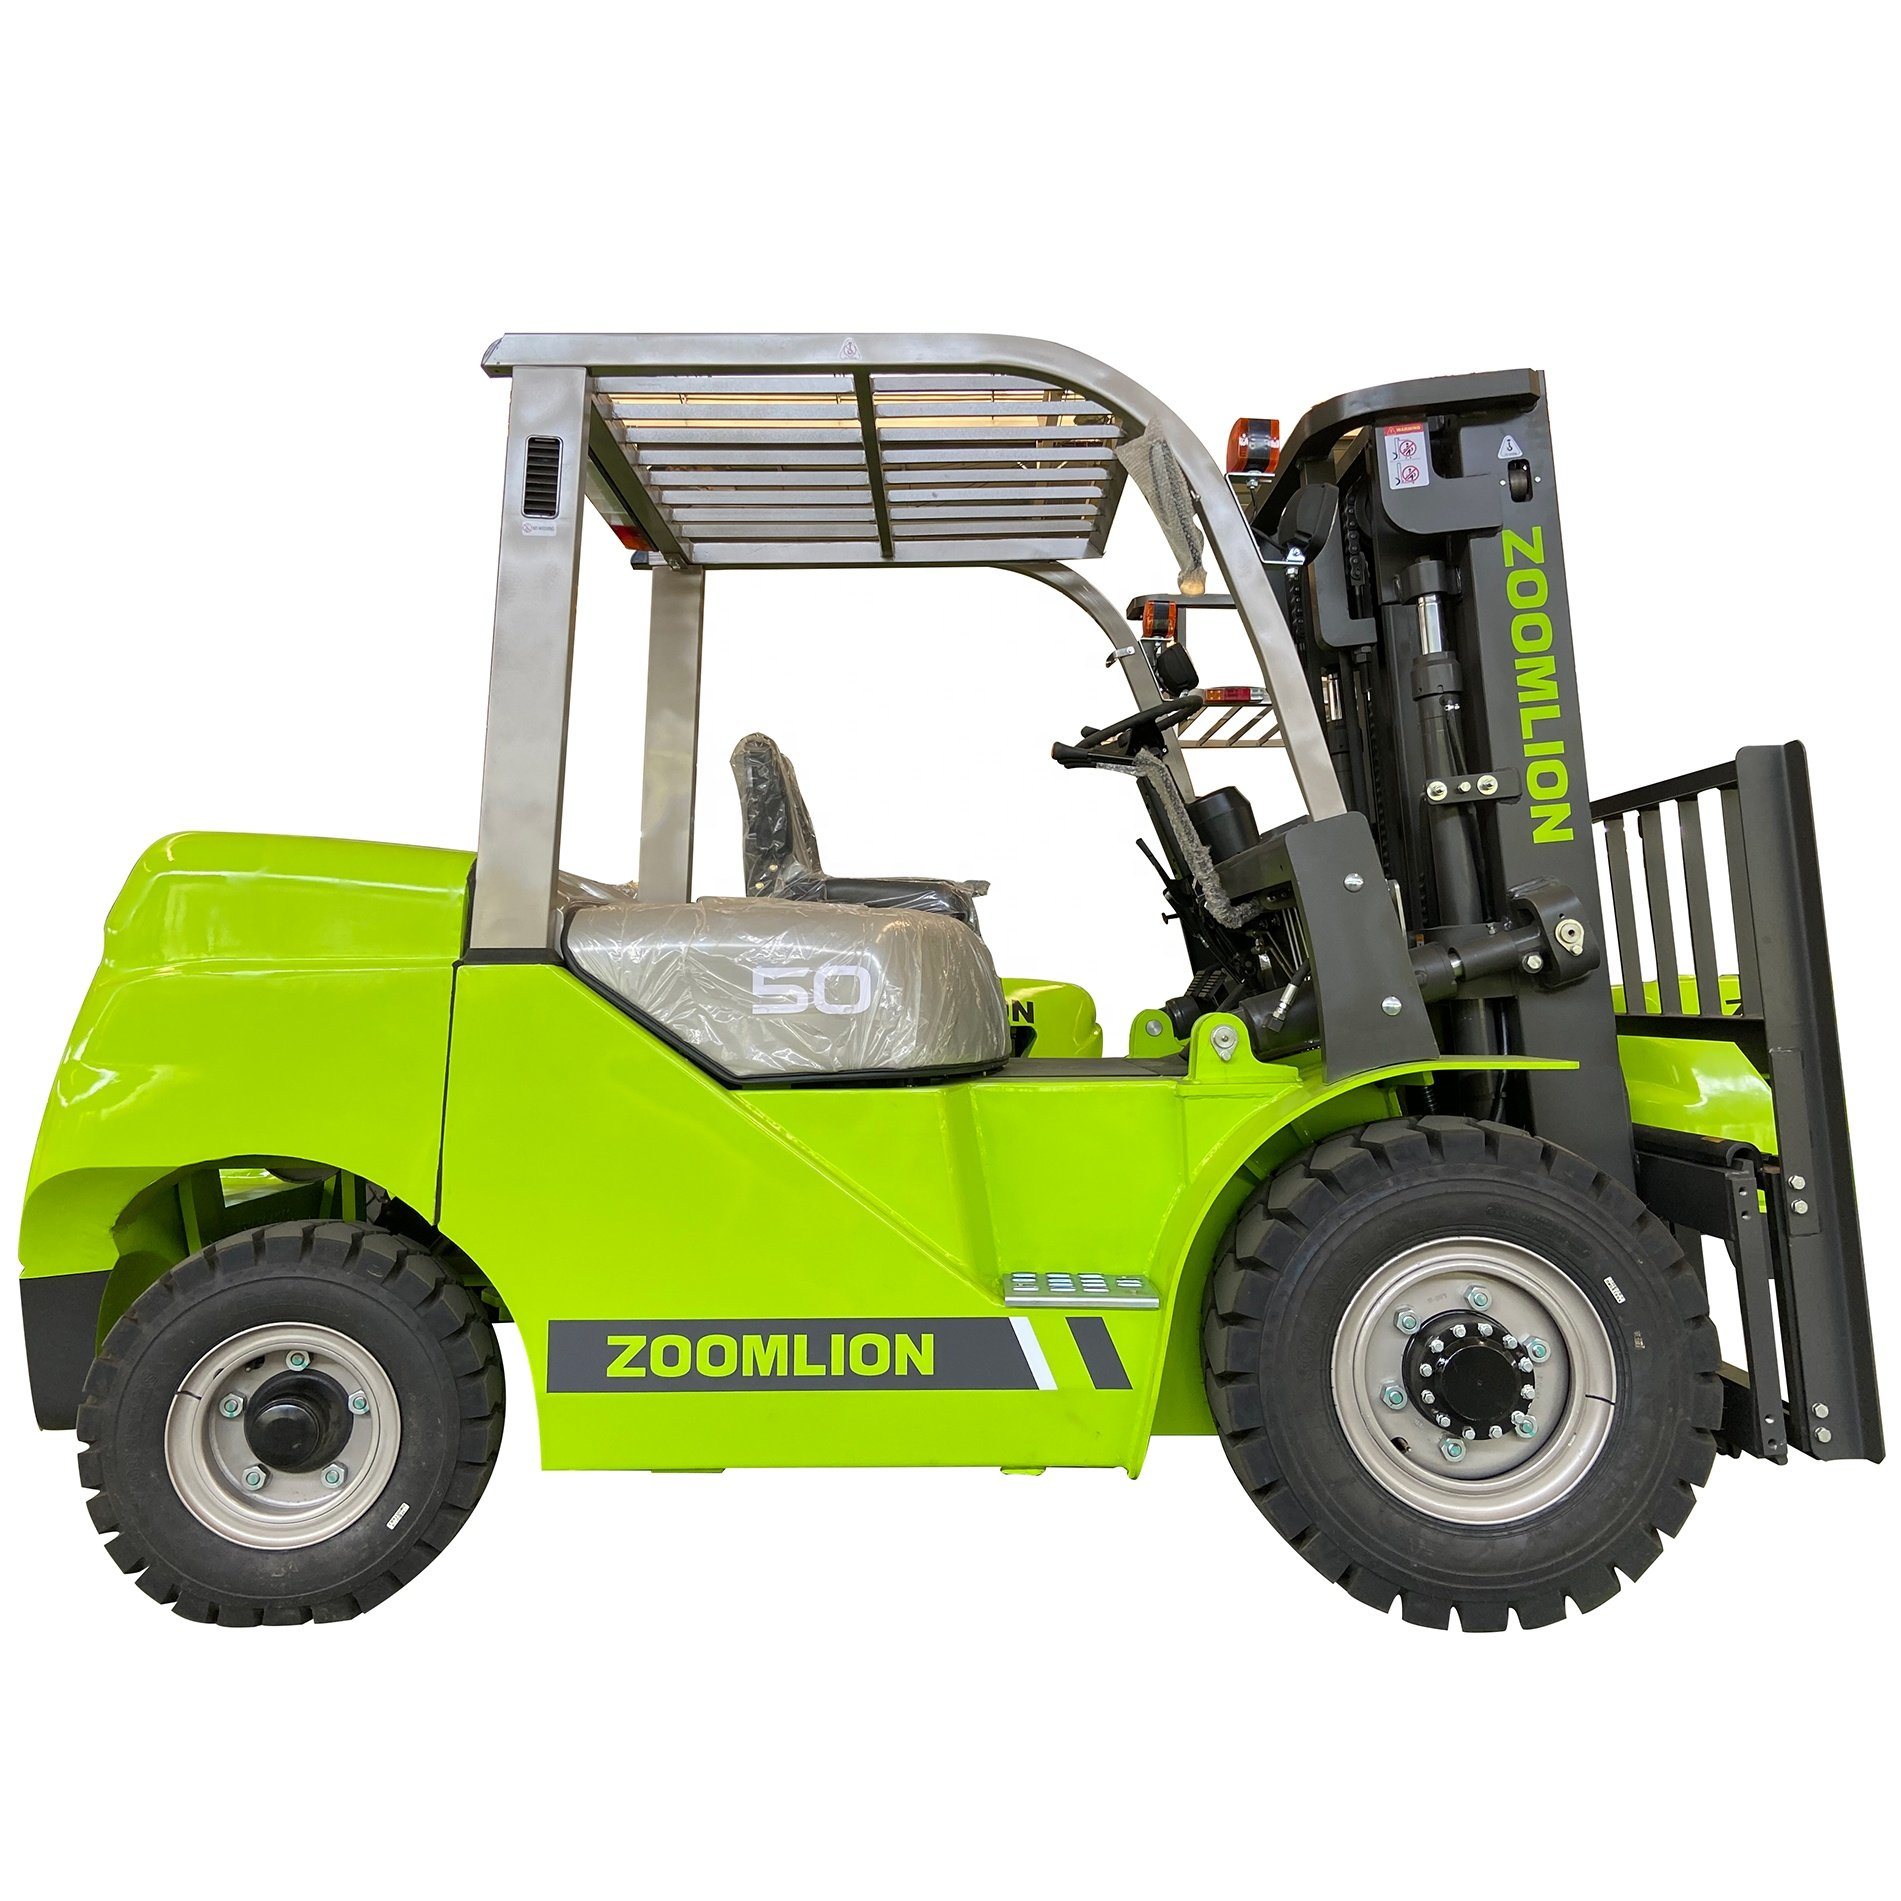 5 Ton Middle Size Zoomlion Diesel Forklift Fd50mini with 500mm Load Center and Isuzu Engine